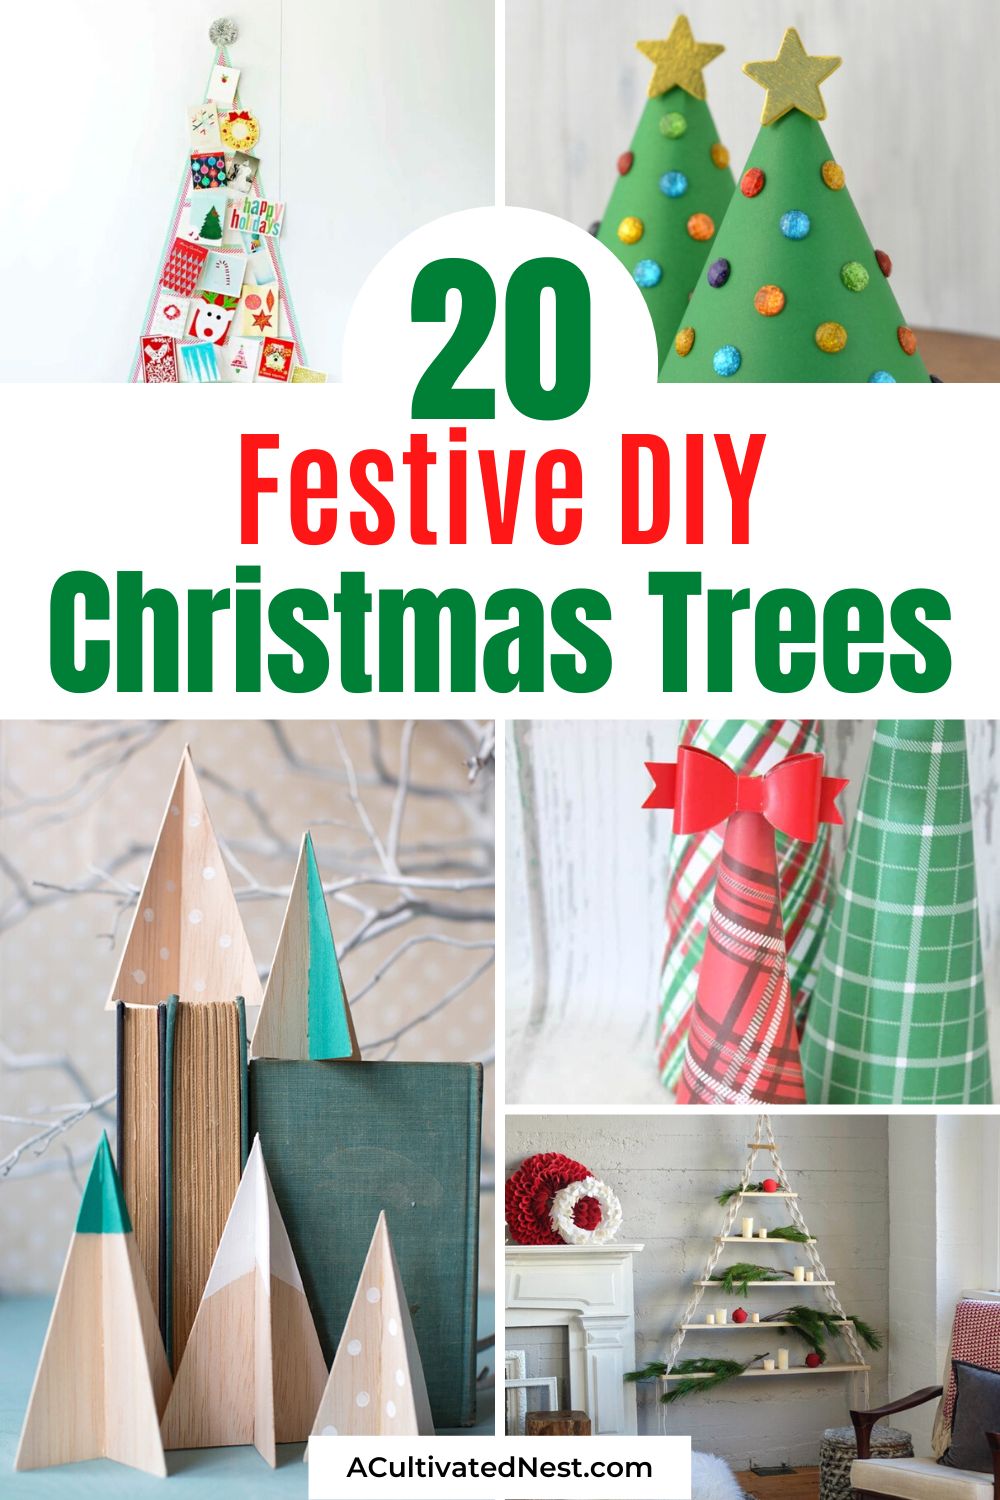 20 Festive DIY Christmas Trees- If you want to fill your home with Christmas tree-themed decor, but don't want to spend a lot, then you'll love these festive DIY Christmas trees! | Christmas tree décor ideas, #ChristmasCrafts #diyChristmas #DIY #ChristmasTrees #ACultivatedNest